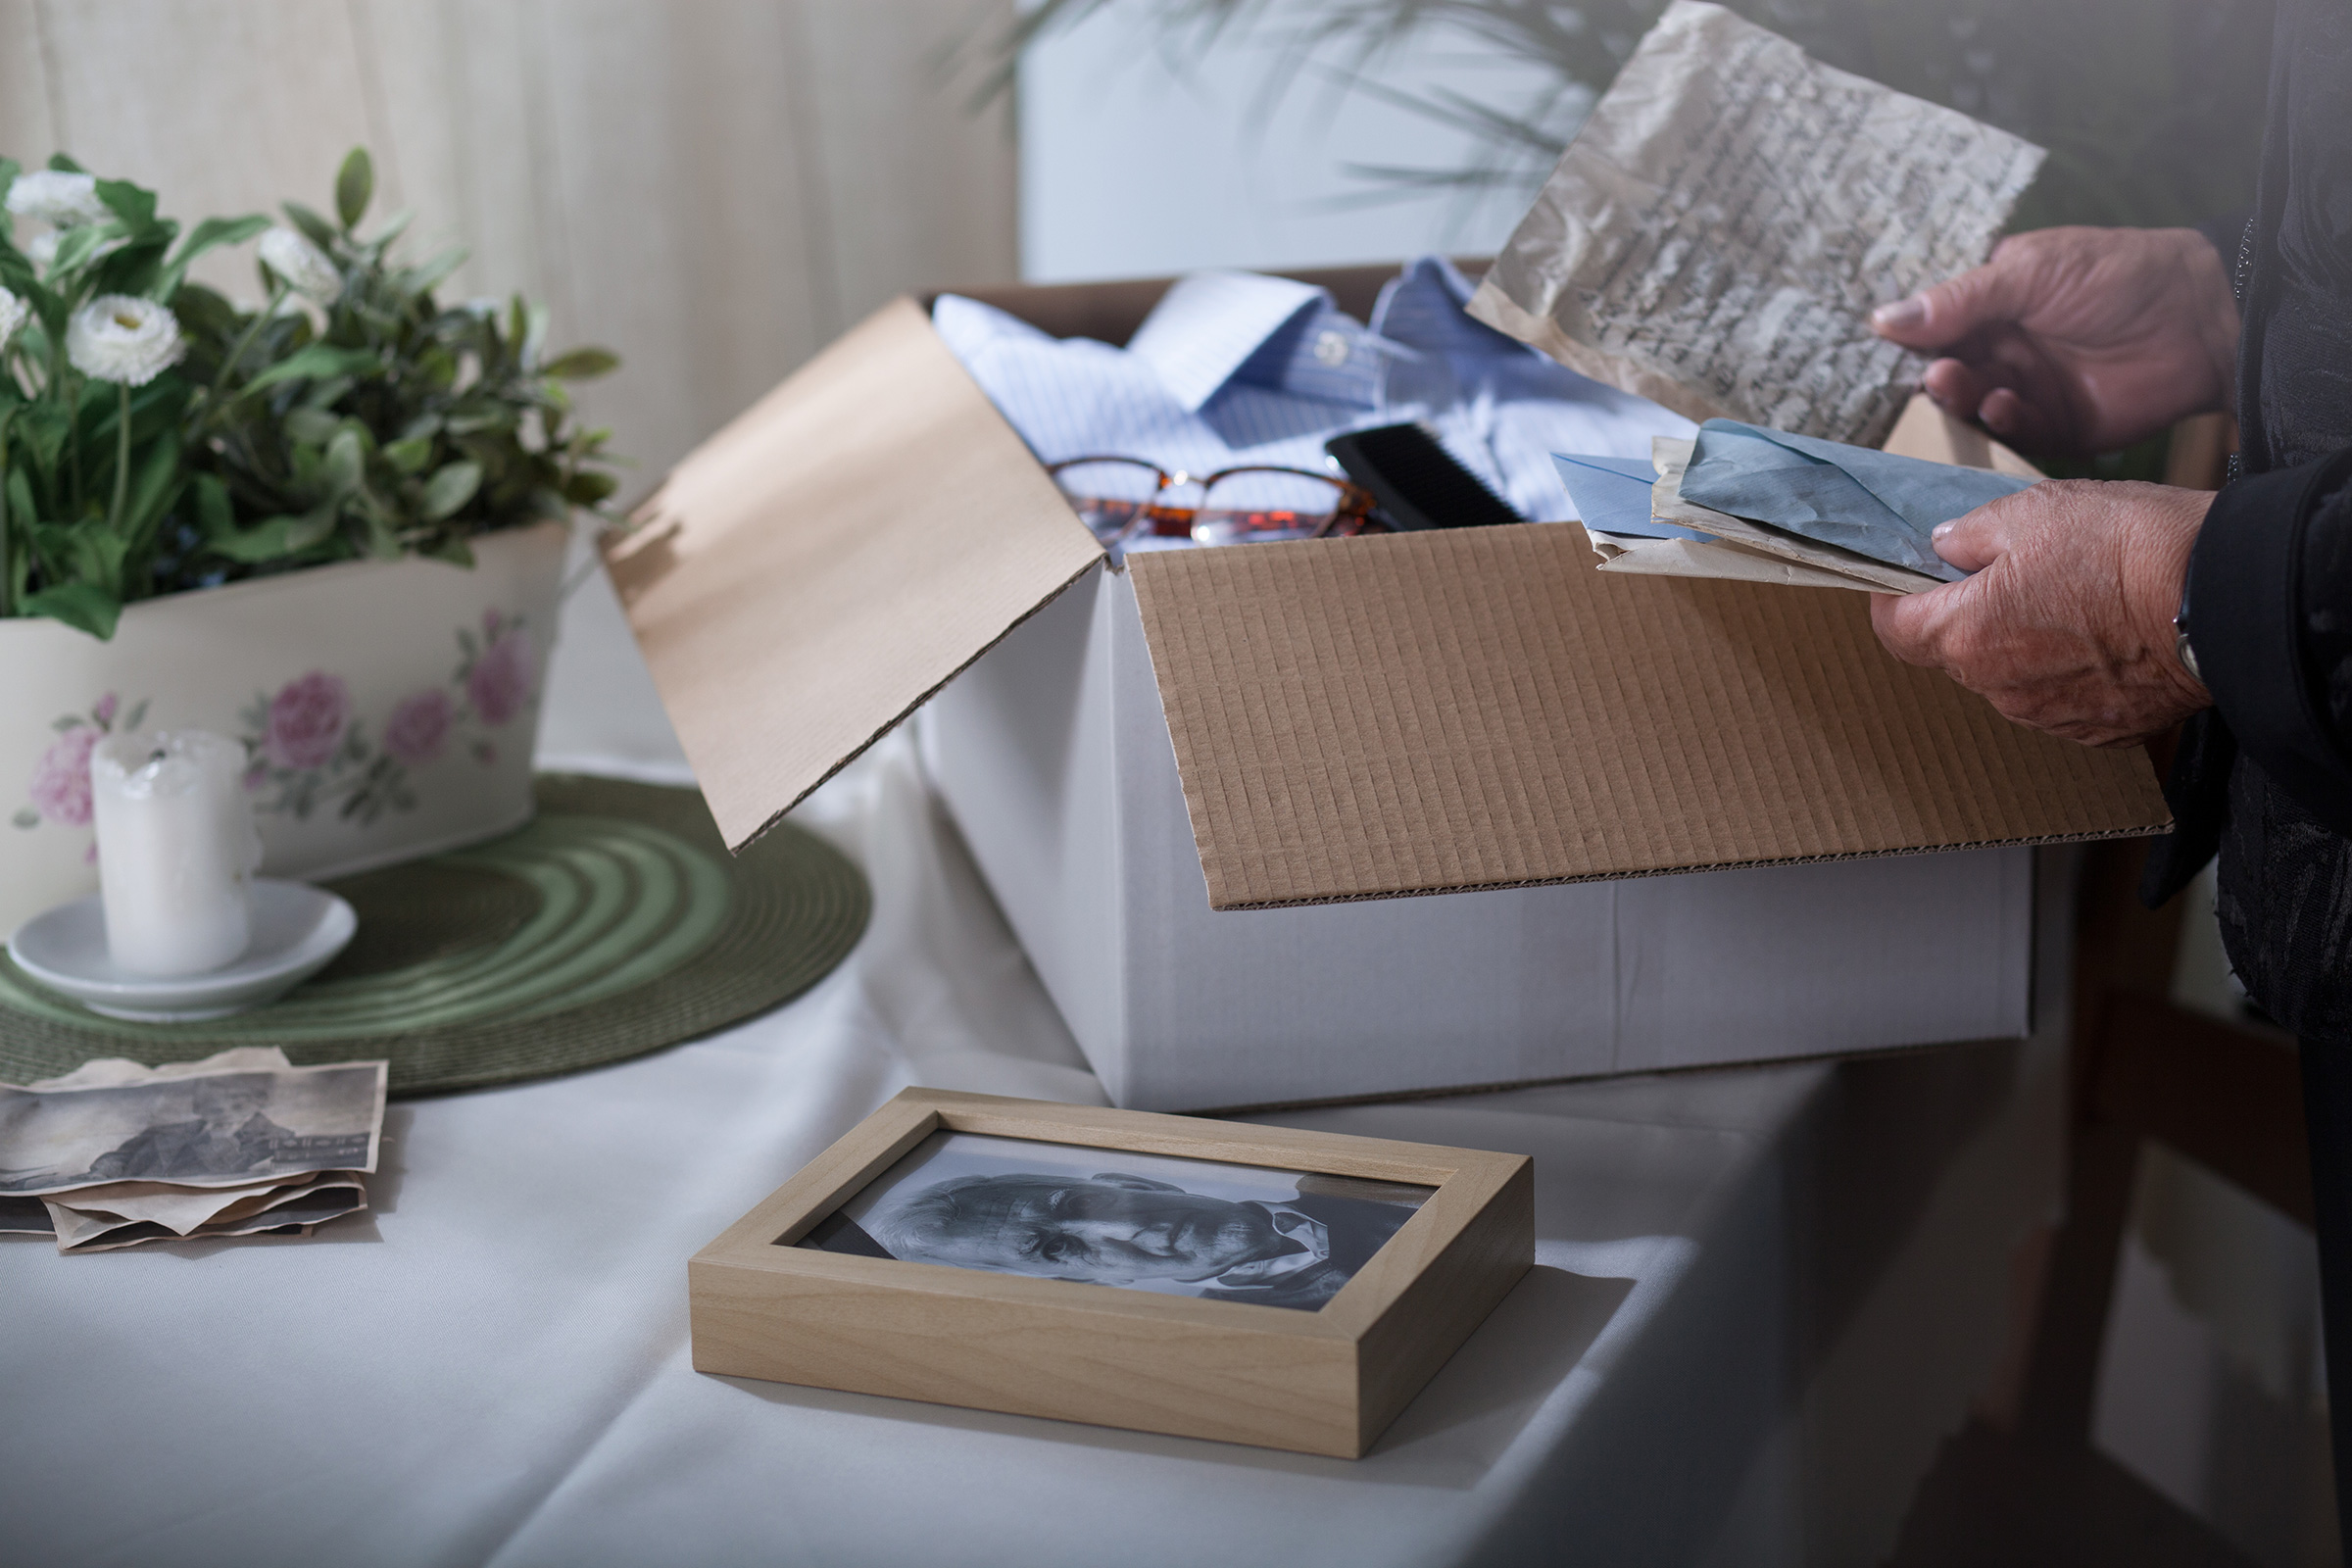 It may sound morbid, but creating a findable file, binder, cloud-based drive, or even shoebox where you store estate documents and meaningful personal effects will save your loved ones incalculable time, money, and suffering.